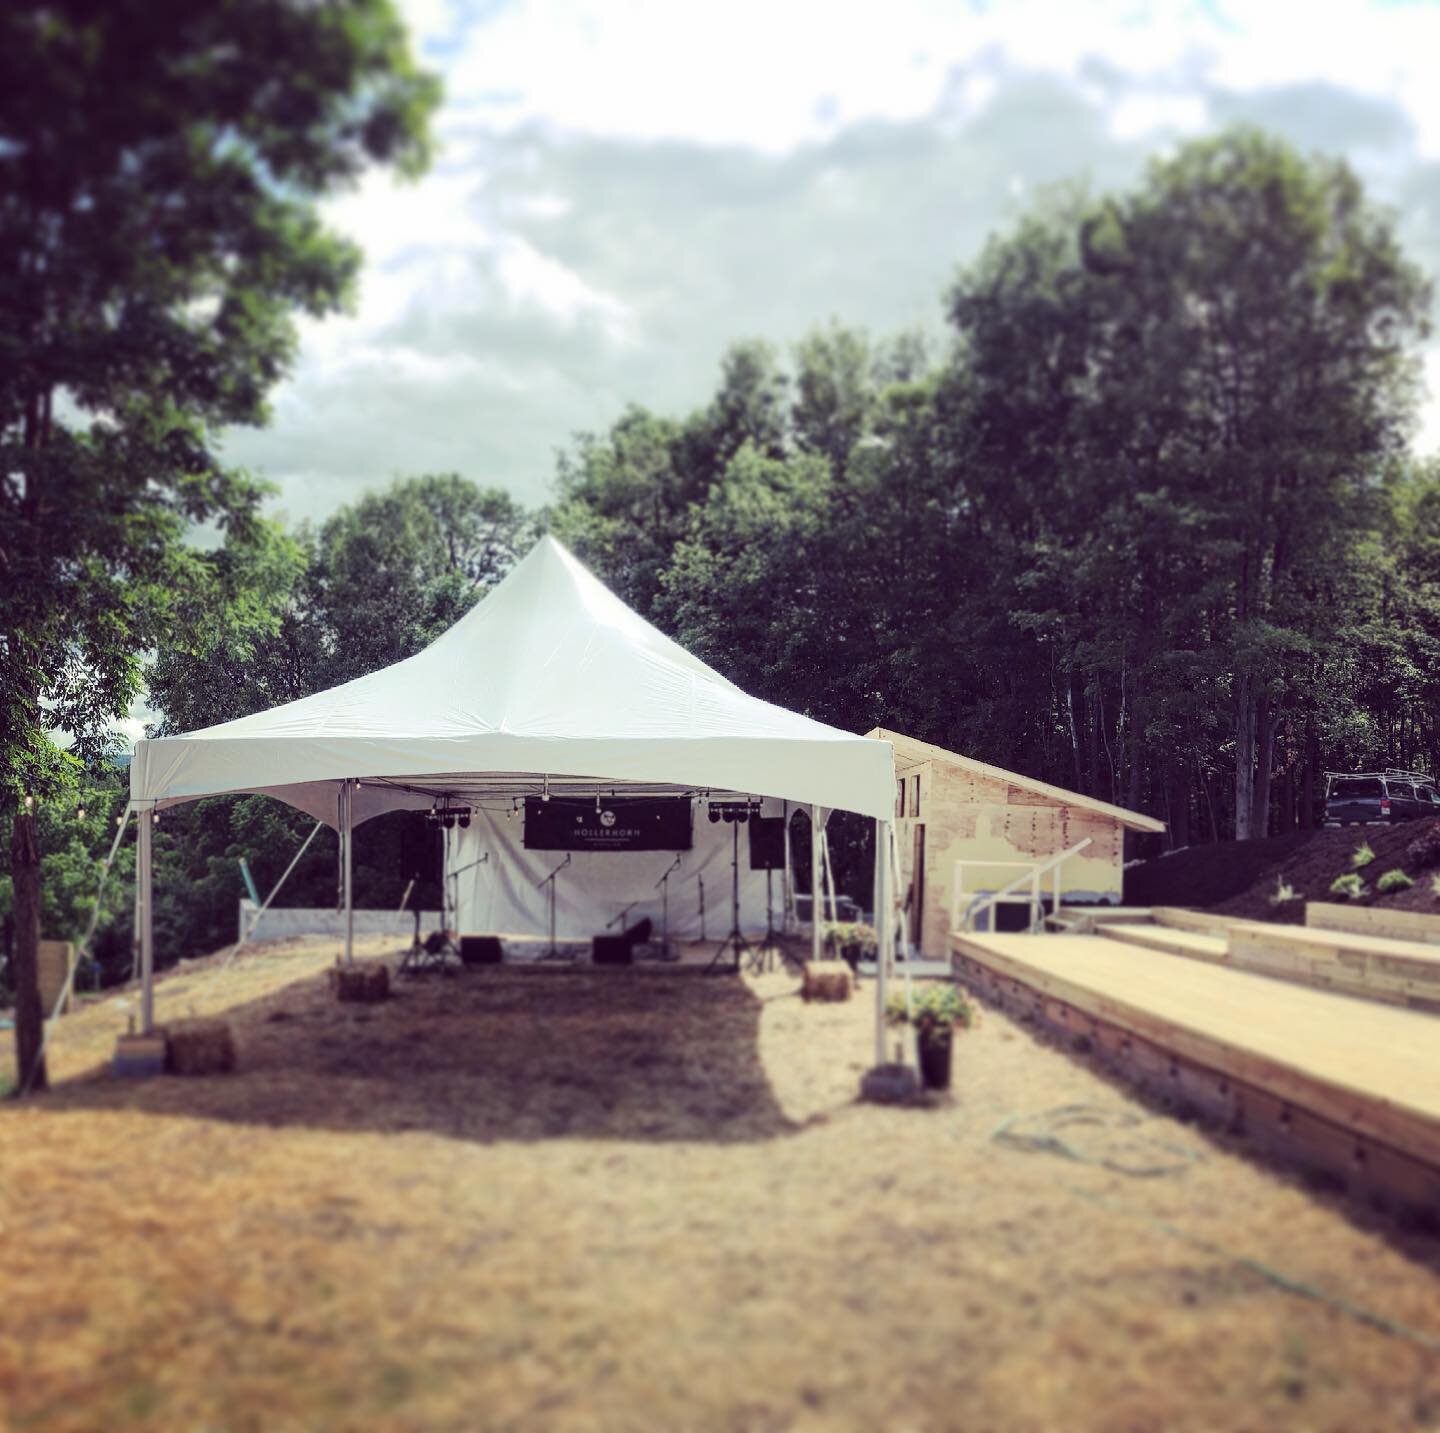 We are ready!!! Sun is shining and the evening looks clear and dry finally 🙌🏽 Time for our kick off event at 7pm &ldquo;SMOKE, BOURBON, AND BLUES&rdquo; with Blues Legend Joe Beard and band, Santiago Cigar Factory, and FLX BBQ 🔥 💨 🥃 🎸 See you a